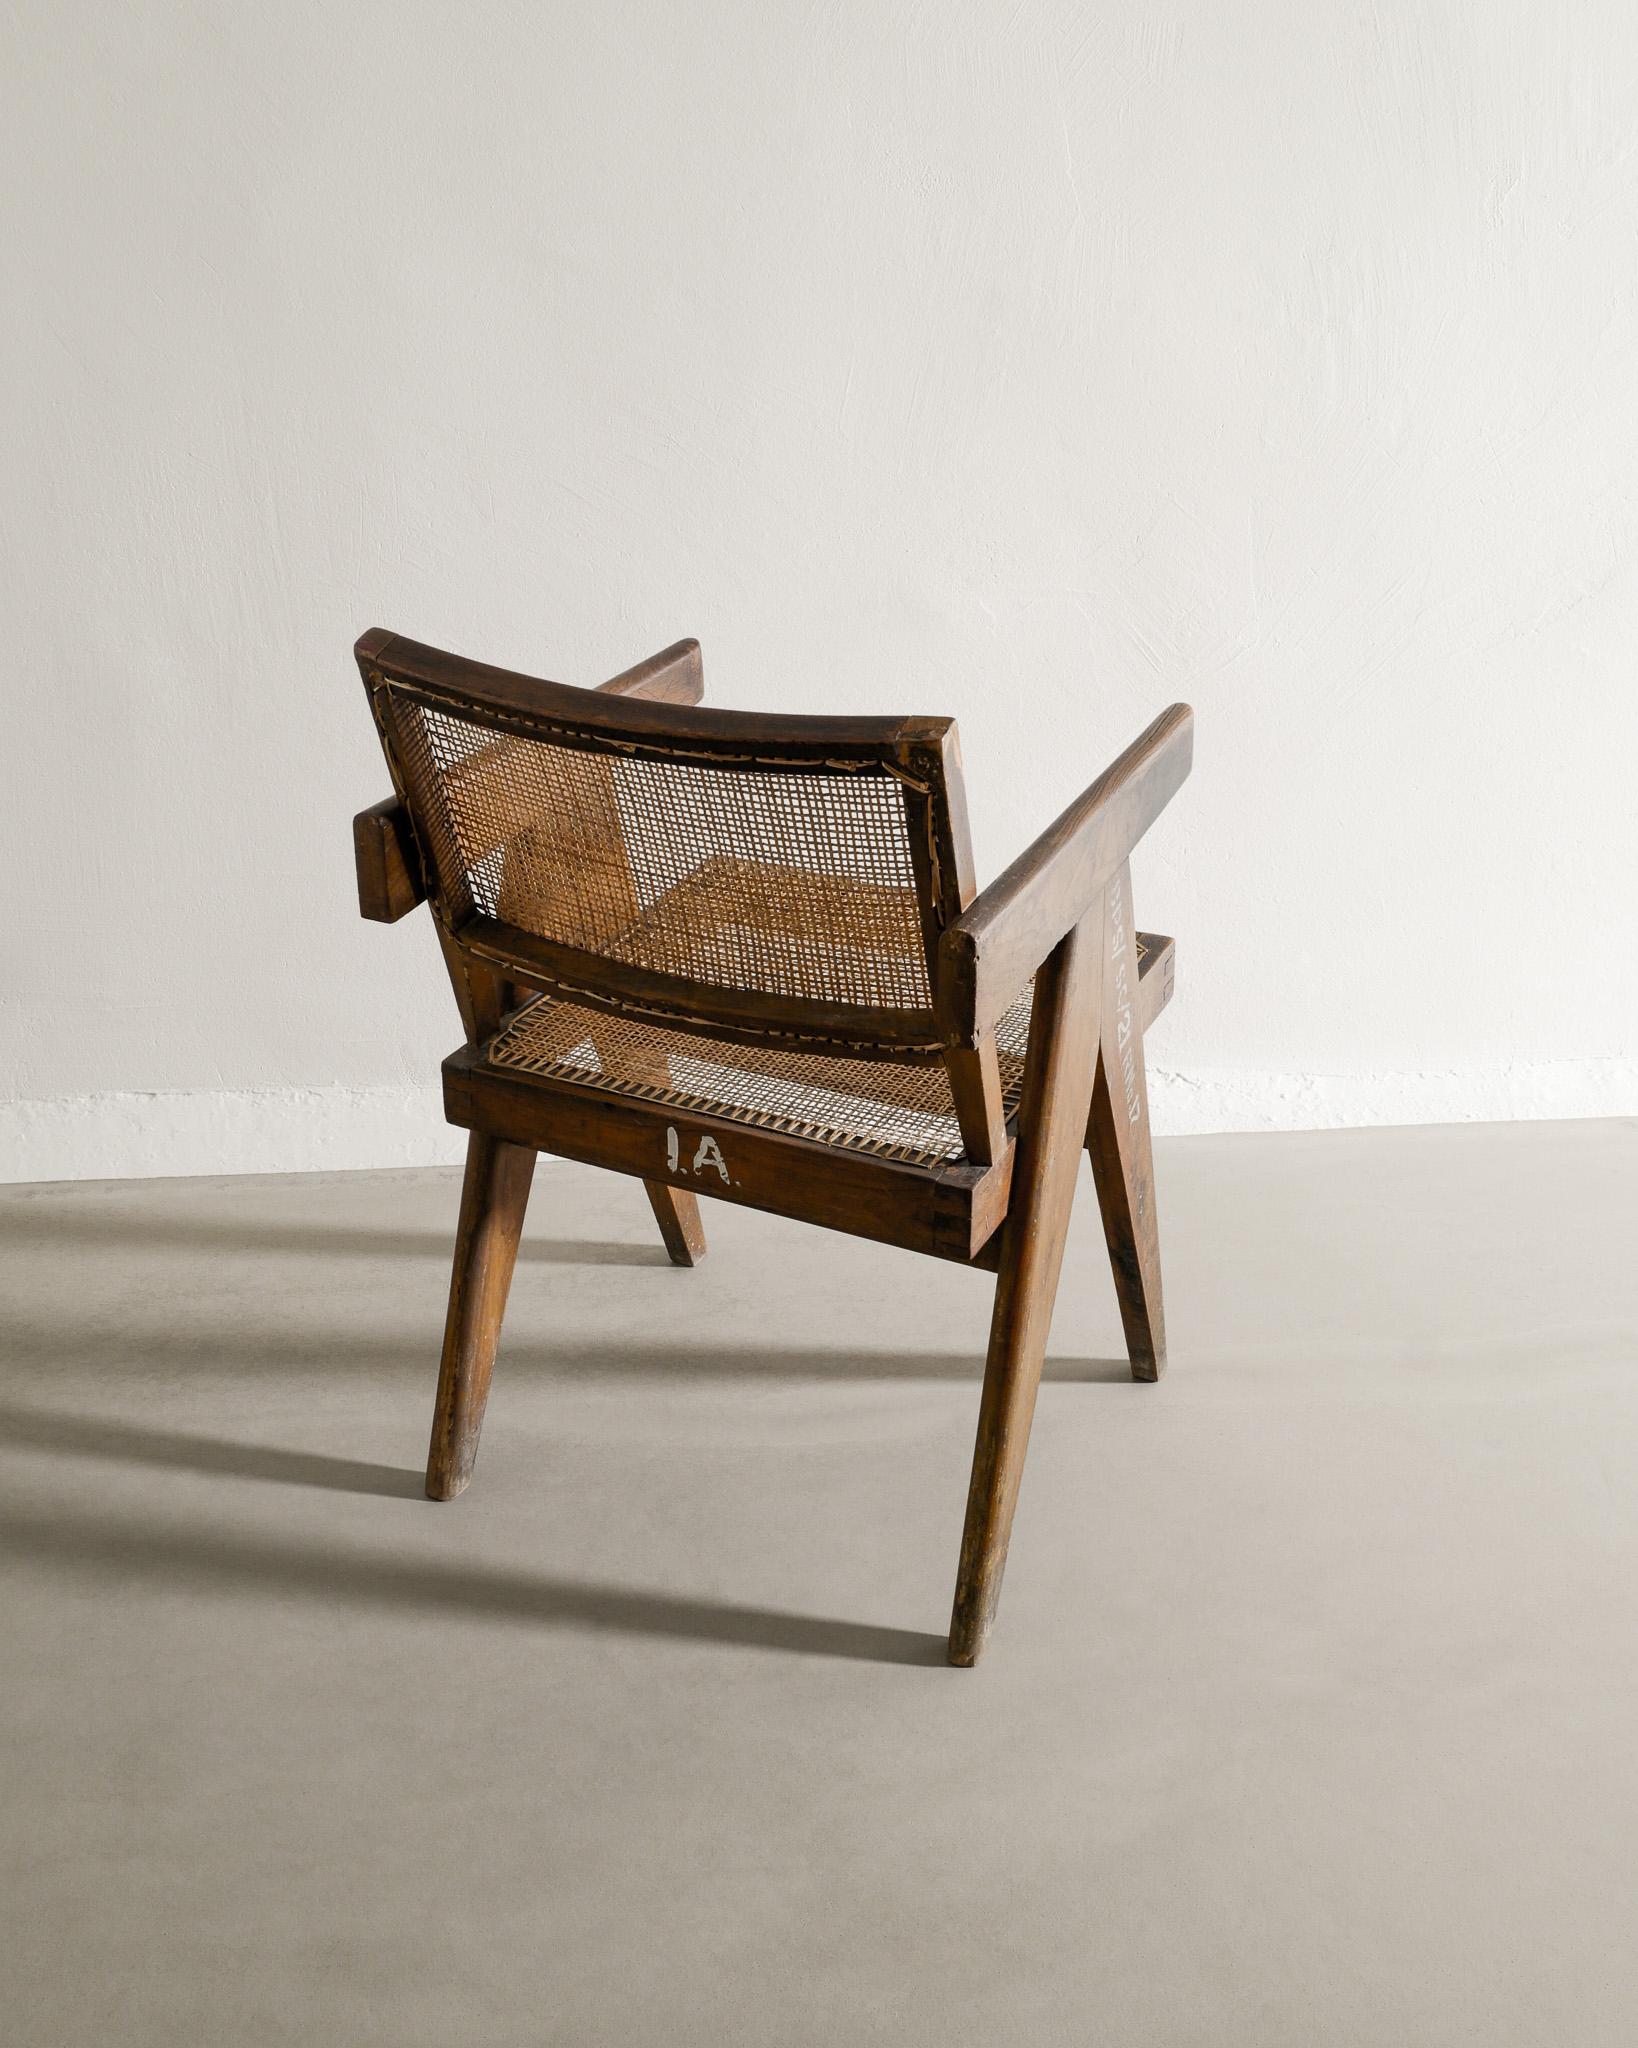 Rare mid century dining / office wooden chair in teak and rattan by Pierre Jeanneret produced for Chandigarh in India 1950s. In good original condition with a nice patina and lettering. 

Dimensions: H: 79 cm / 31.1